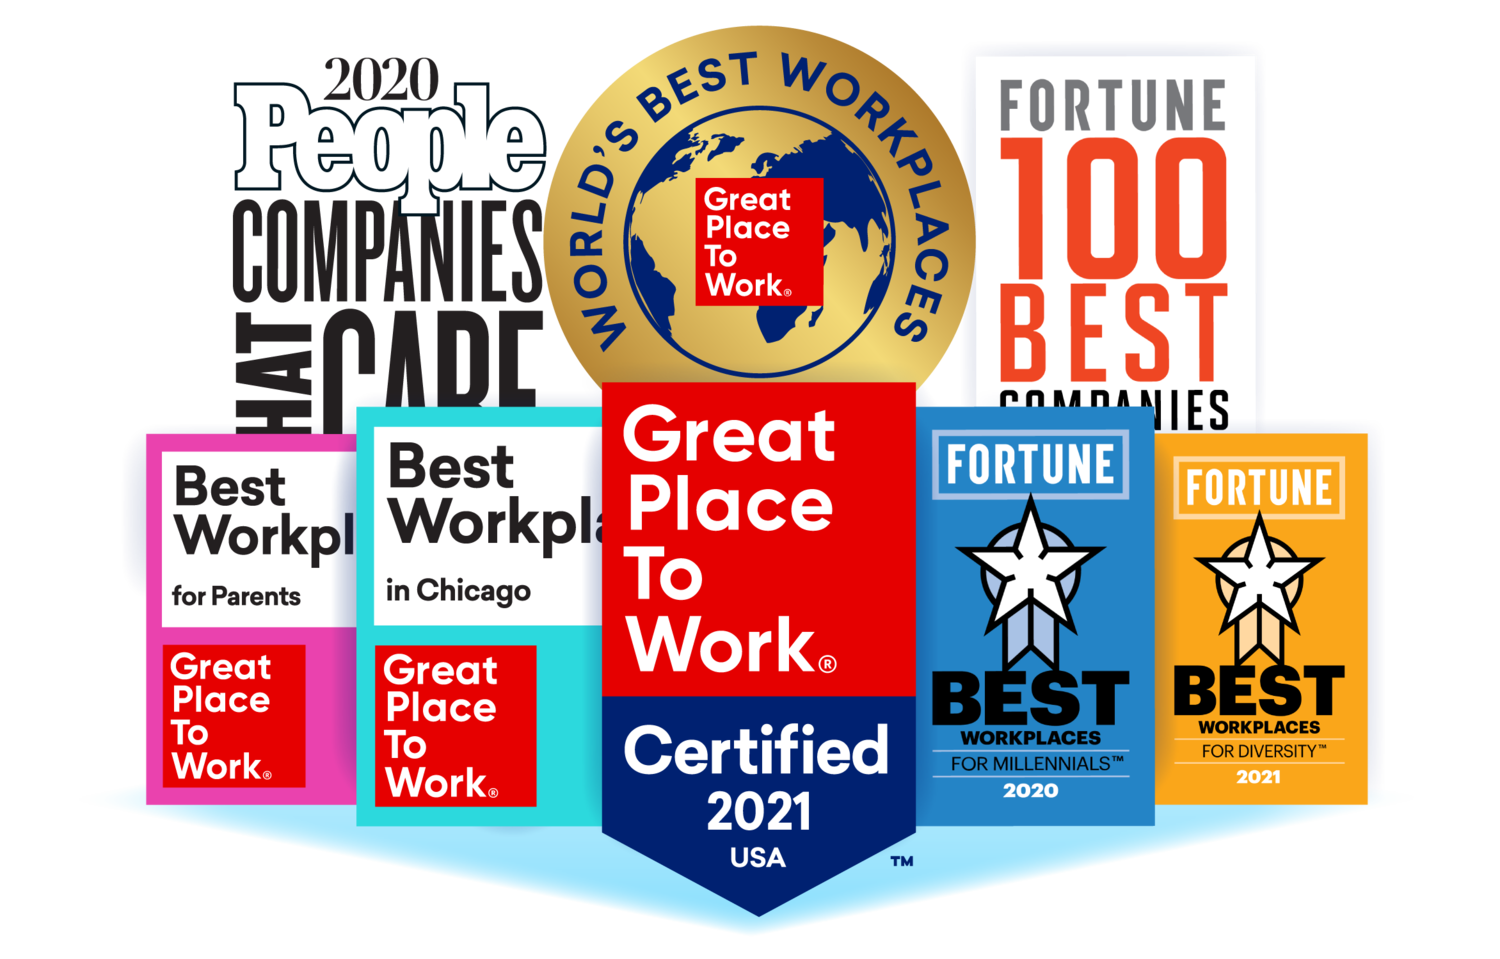 Certification | Great Place to Work®